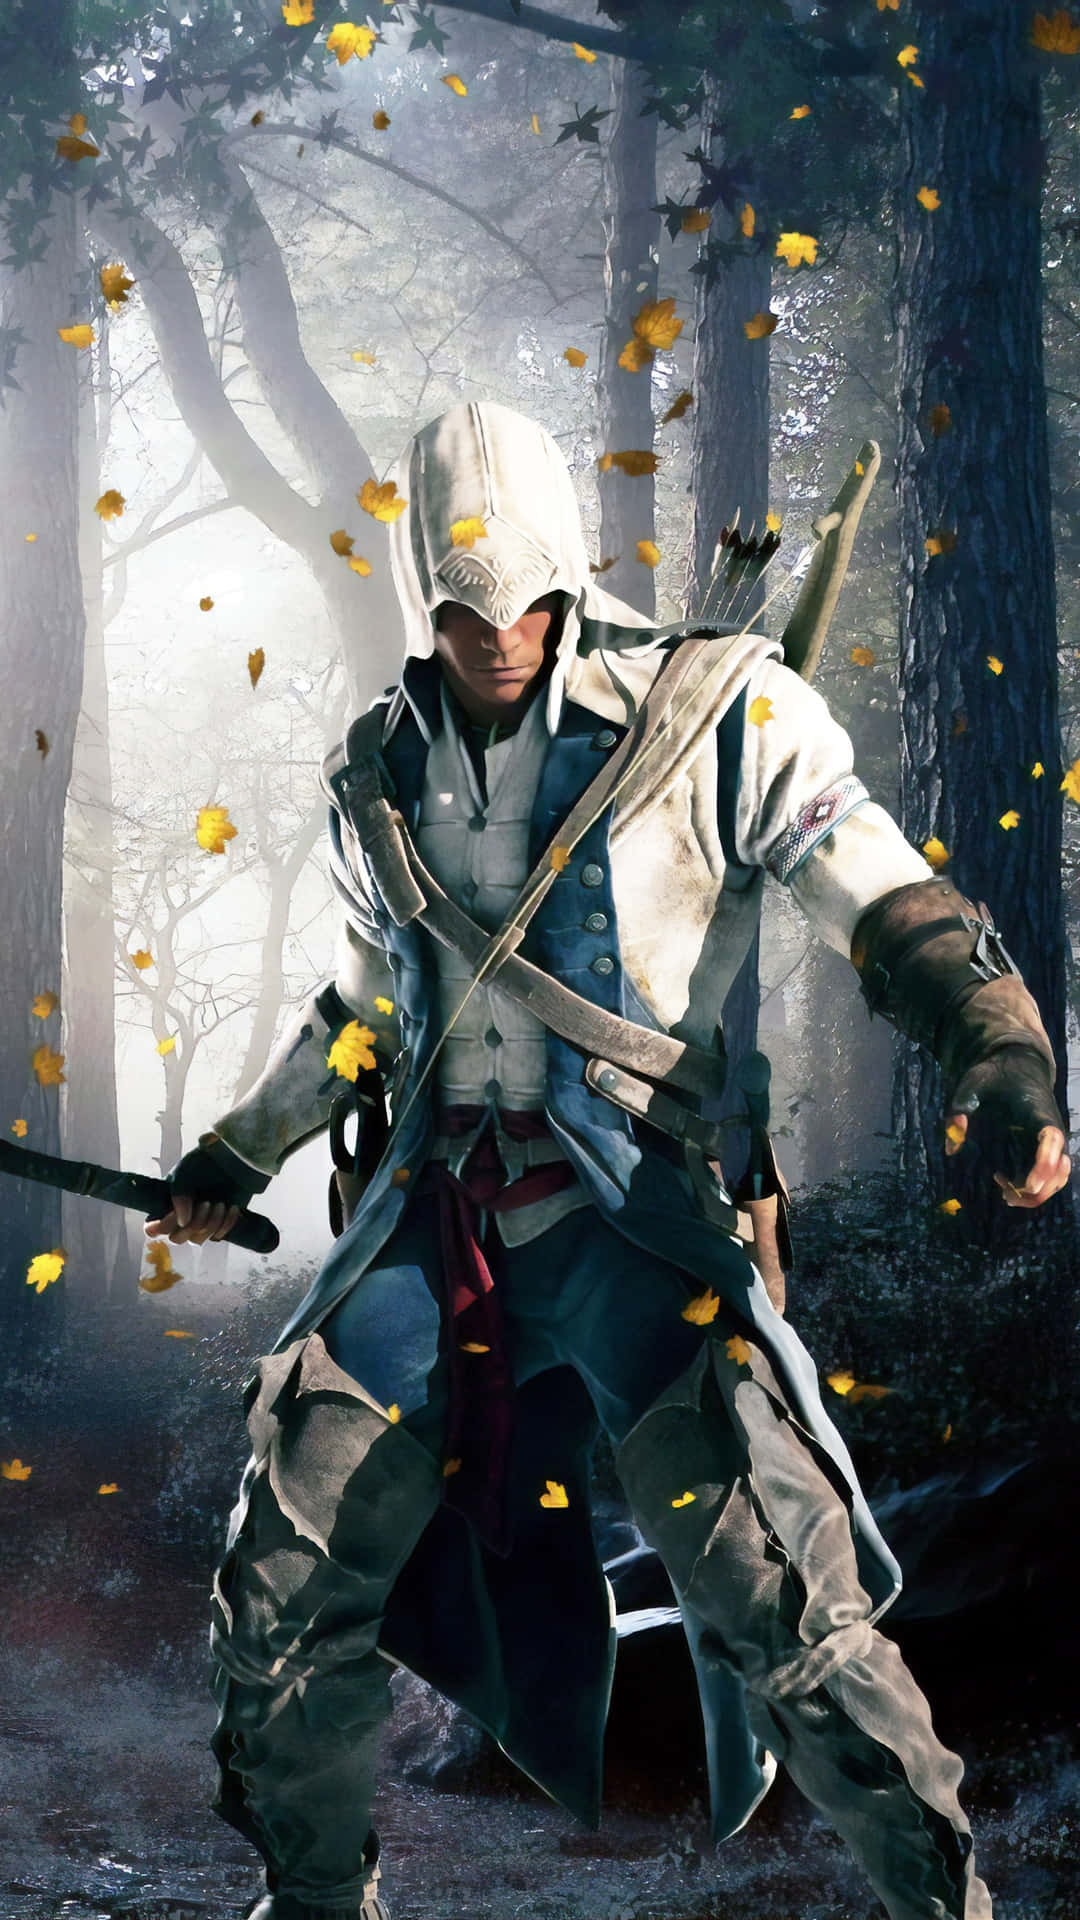 Assassin's Creed Iii - A Man With A Sword In The Woods Background